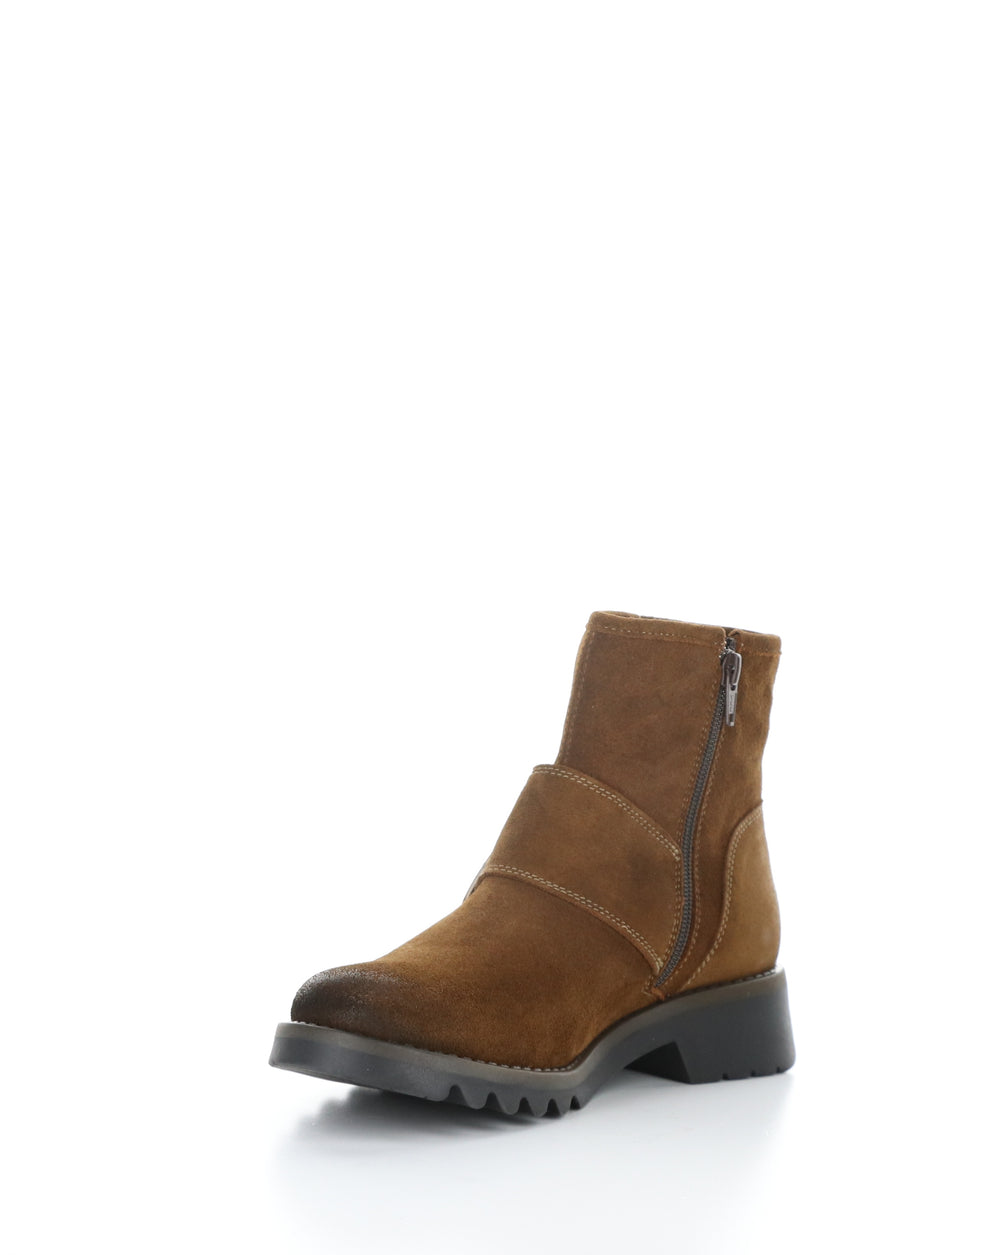 RILY991FLY 009 CAMEL Round Toe Boots